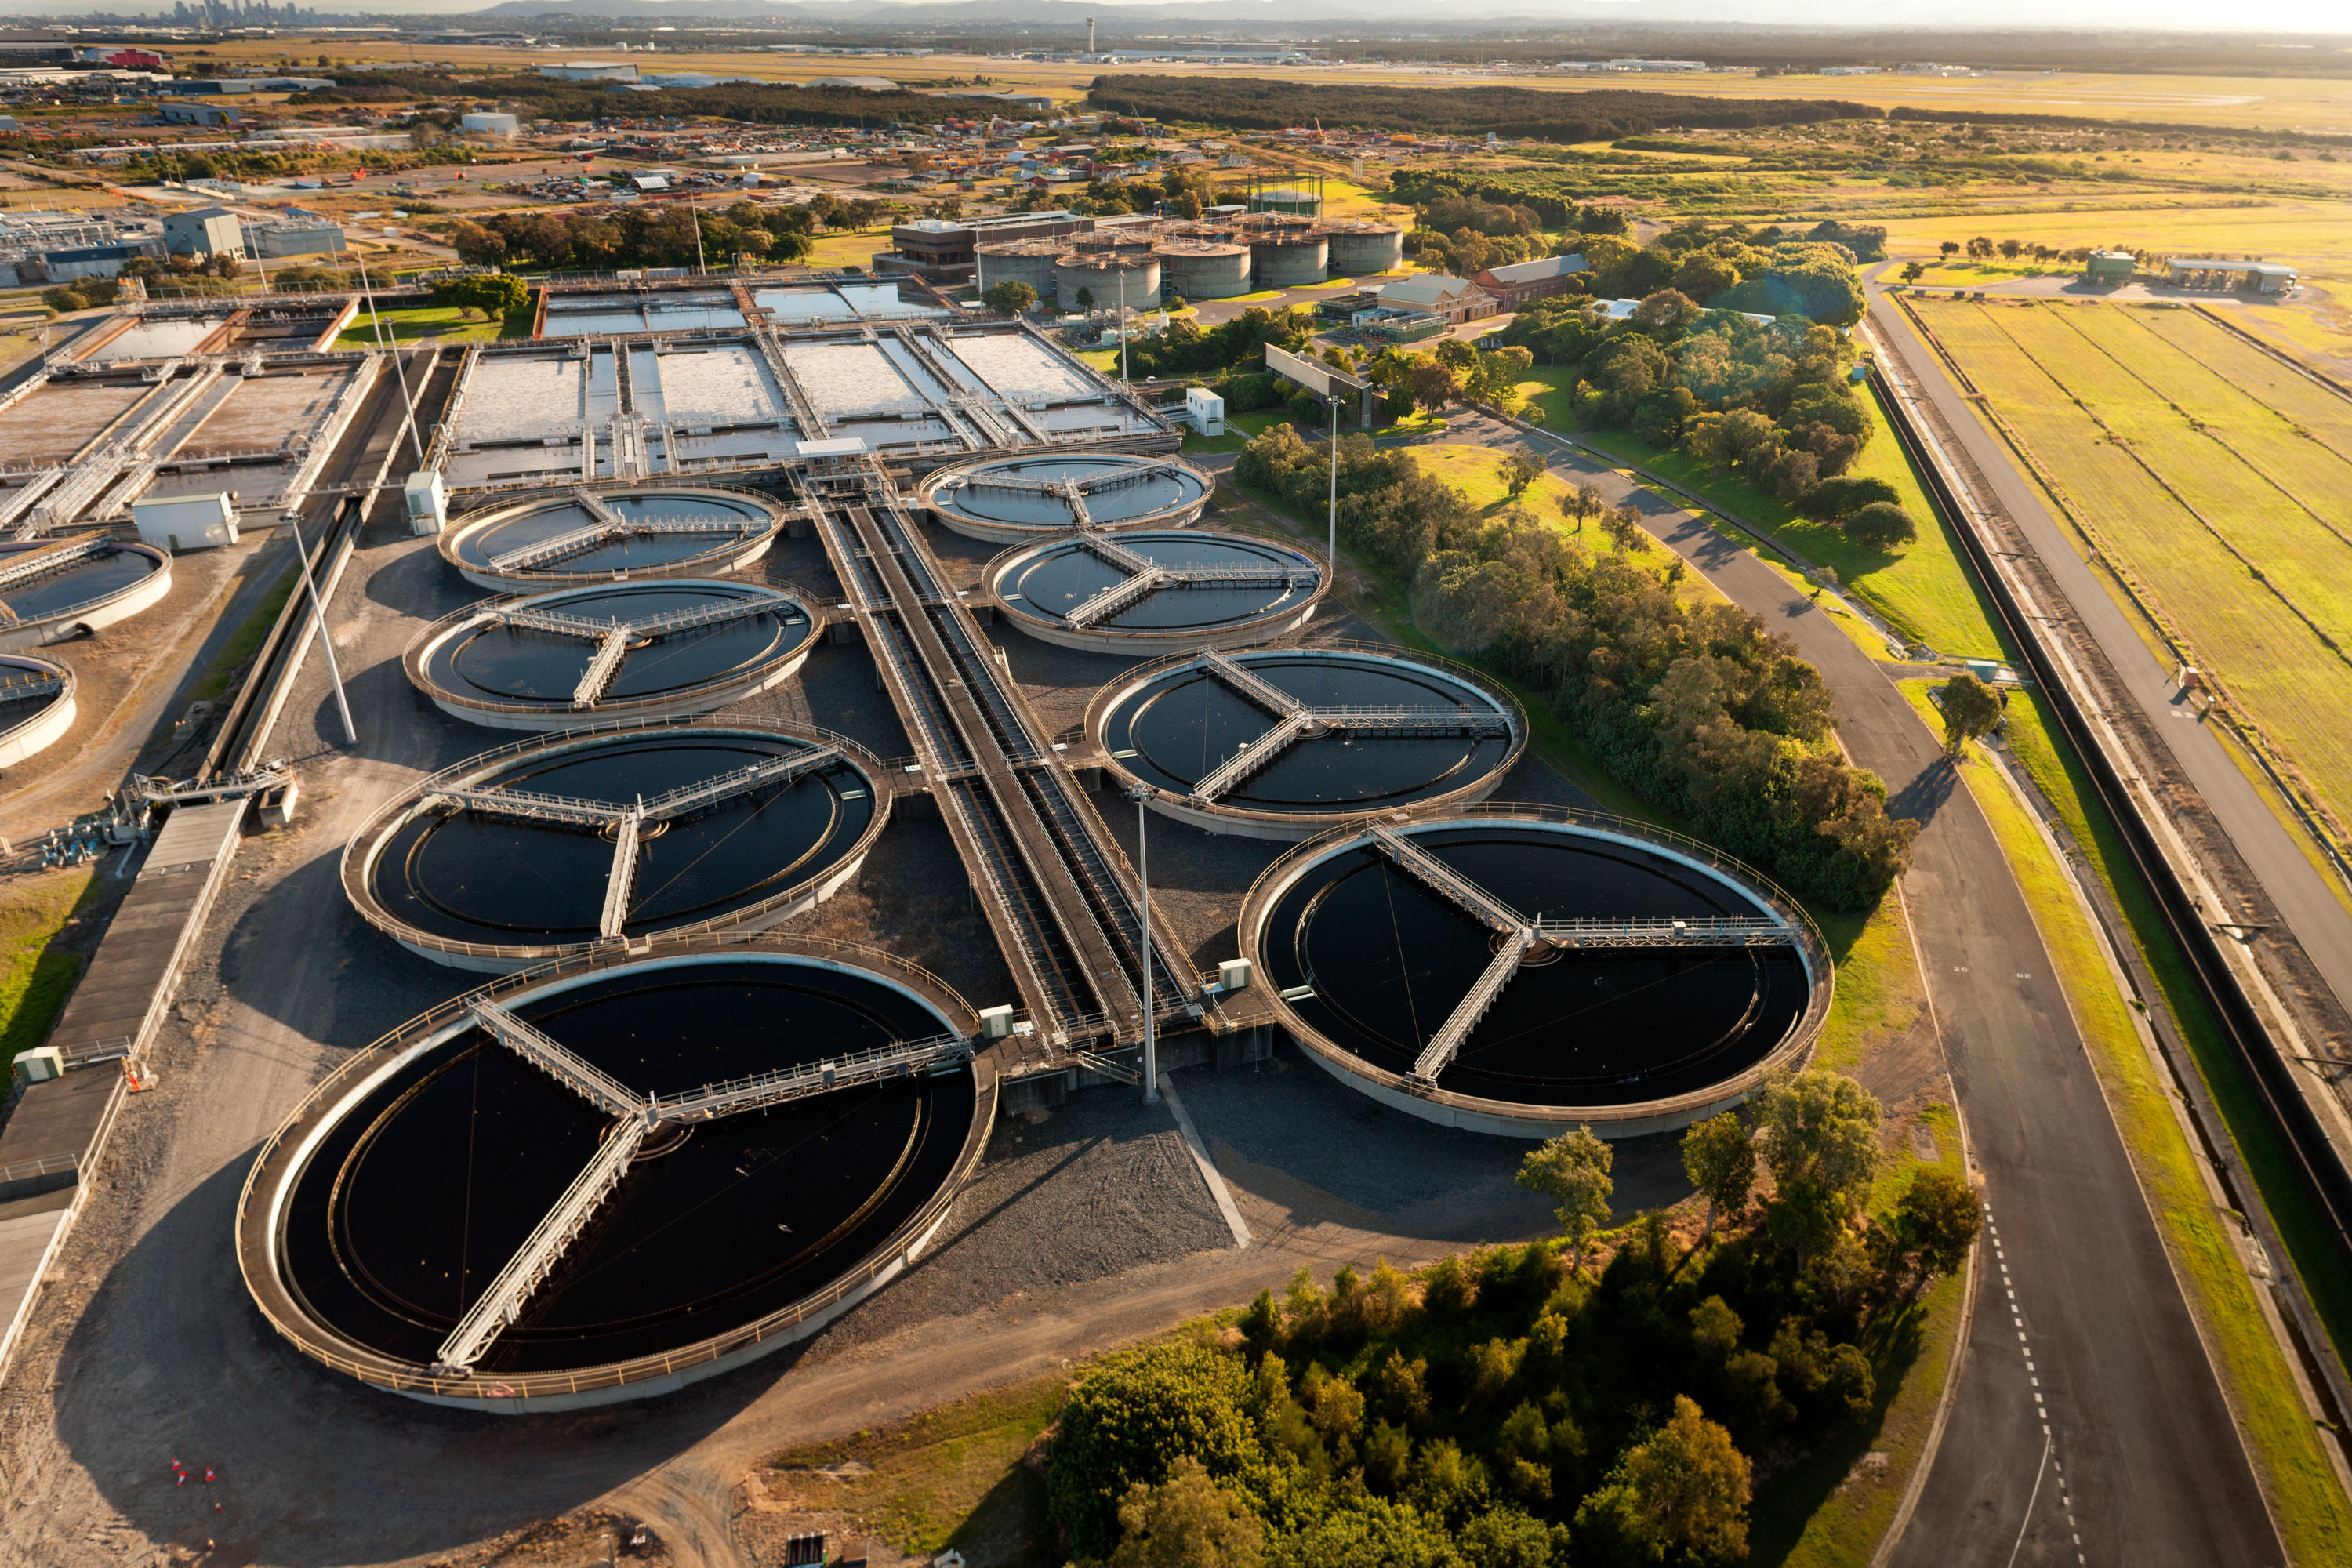 Overview of Wastewater Treatment Technologies